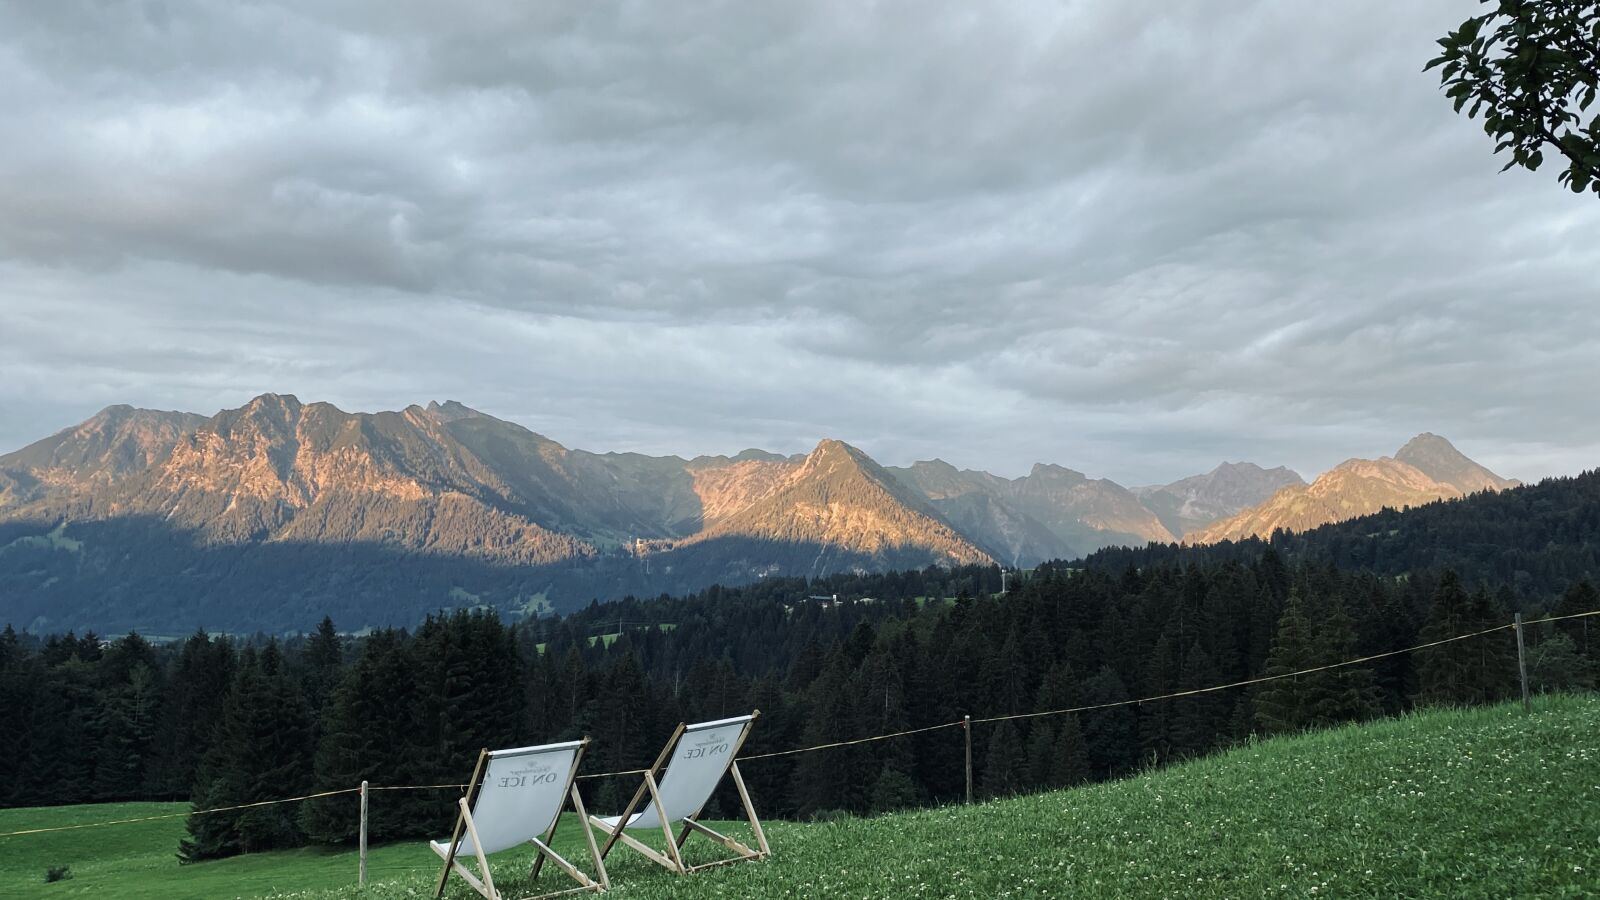 Apple iPhone 11 Pro sample photo. Mountains, meadow, deck chair photography